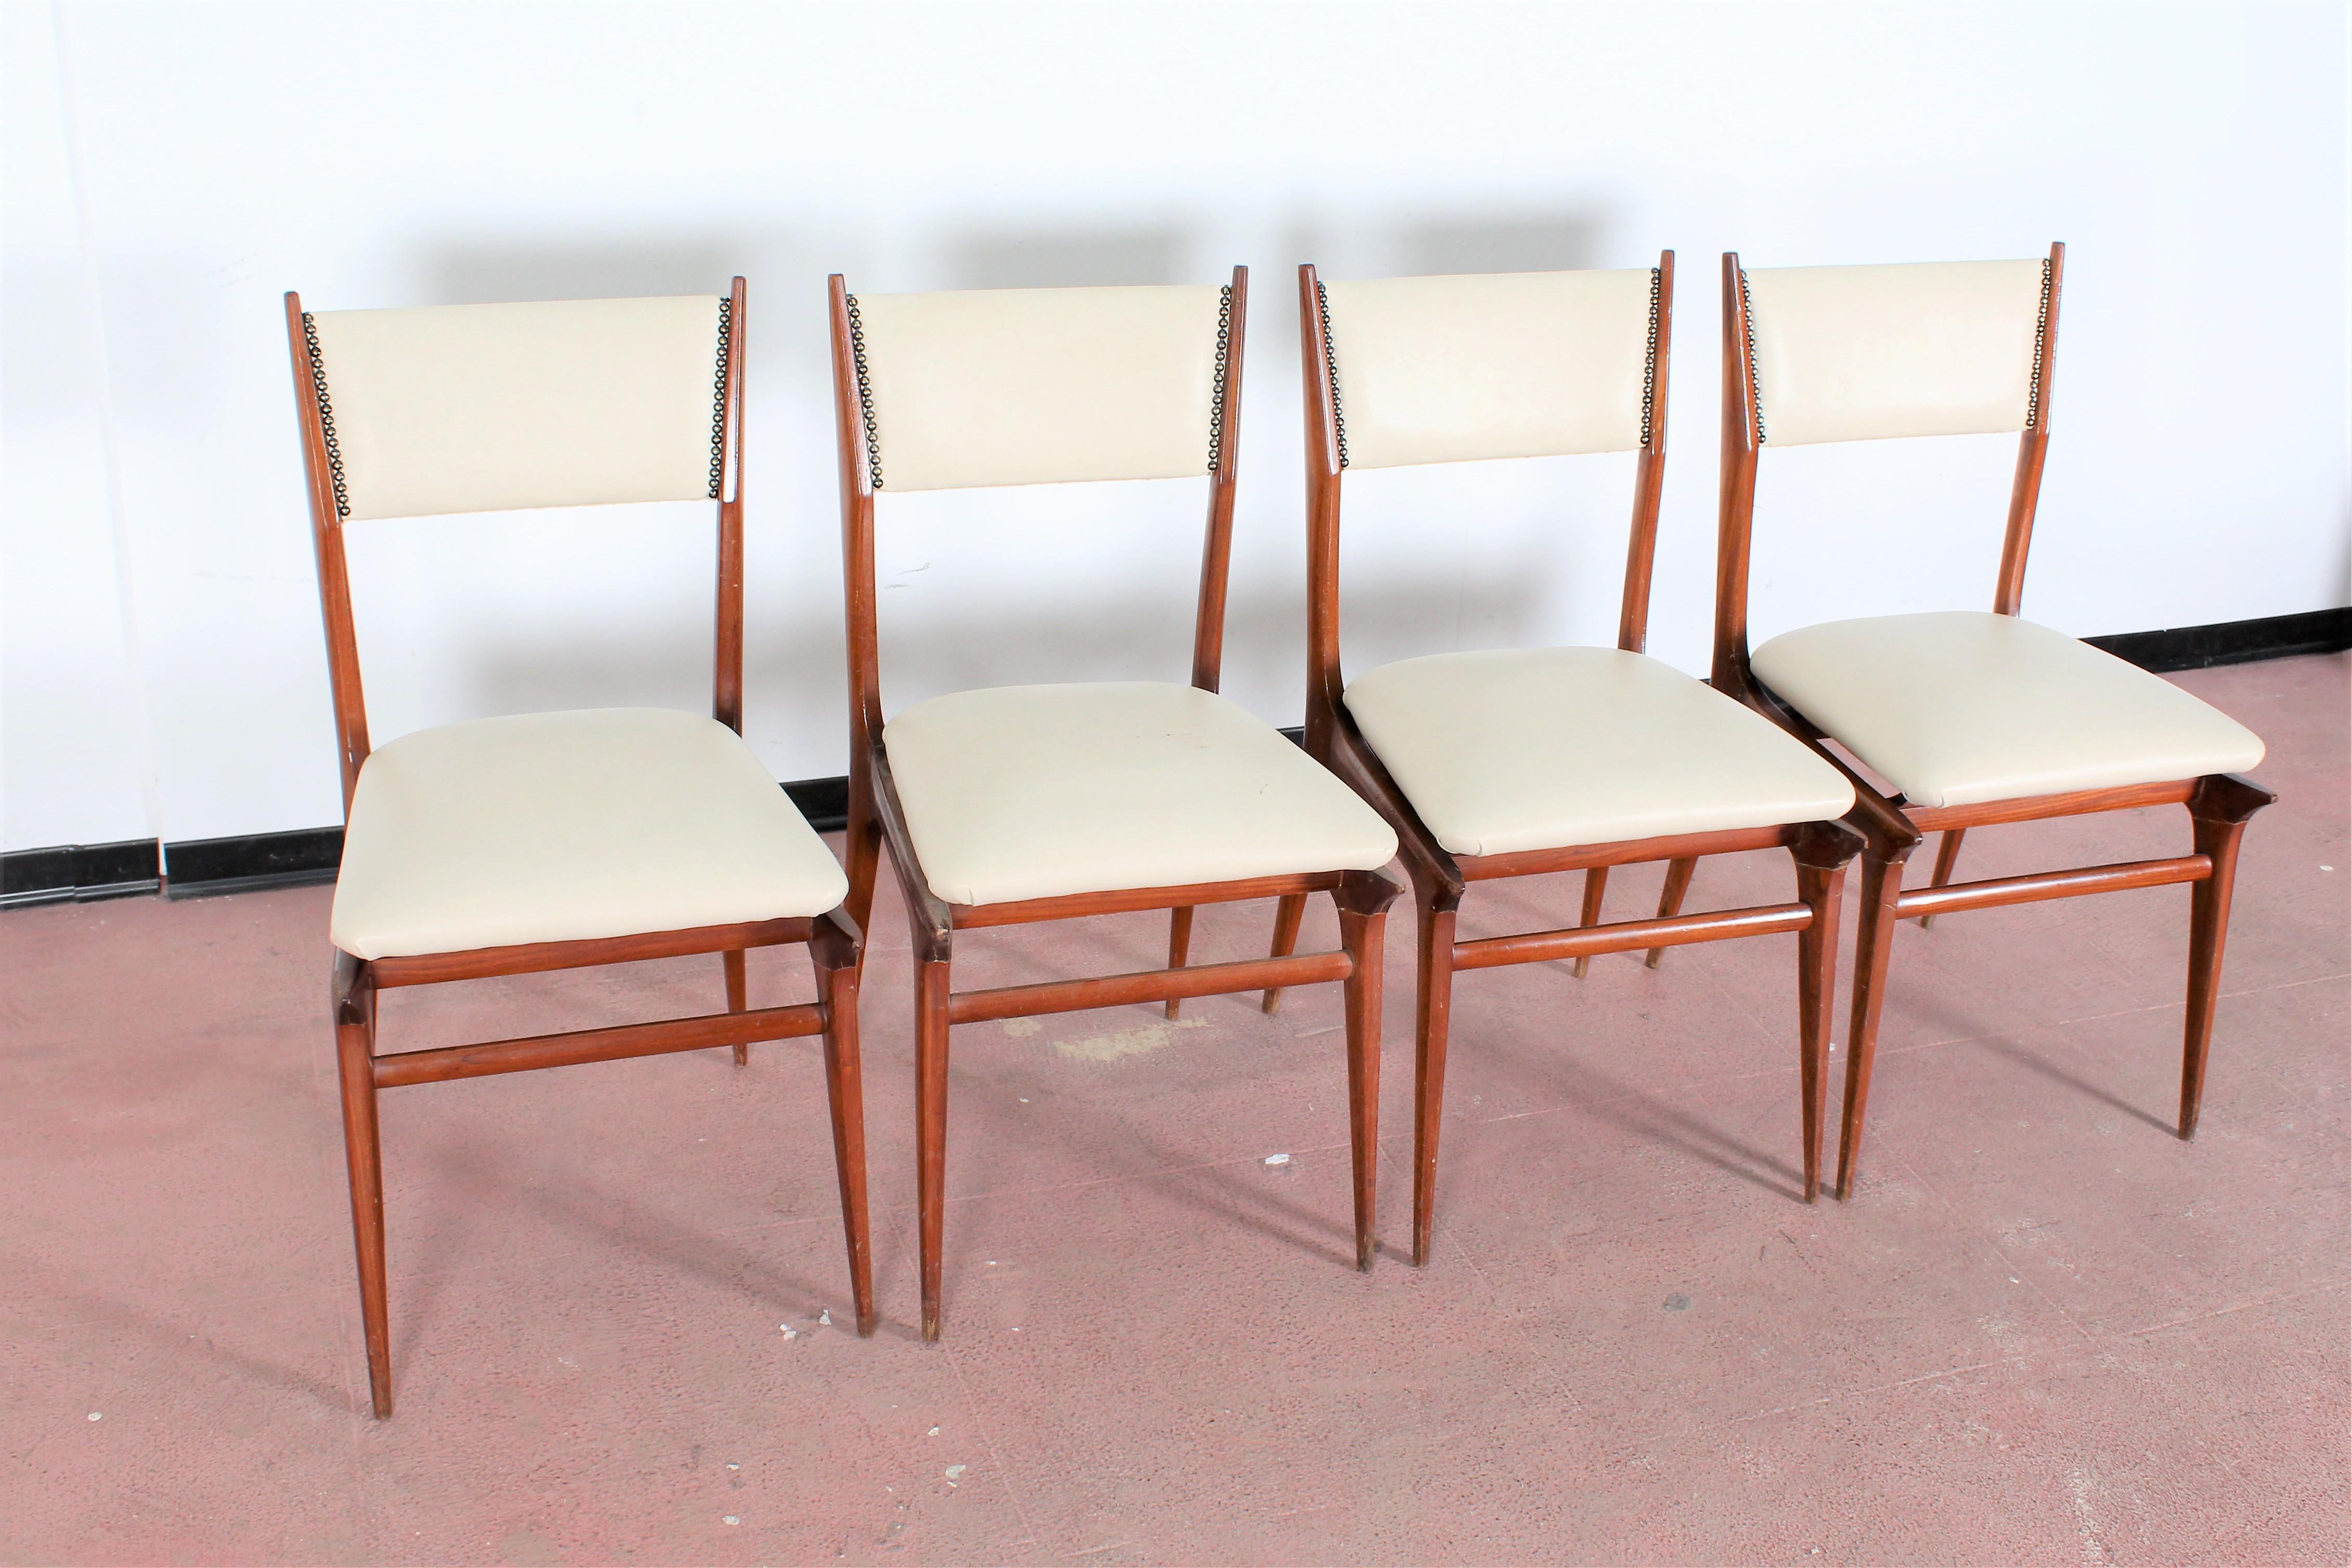 Italian Midcentury Wood and Leatherette Chairs Carlo de Carli Italy 1950s Set of 4